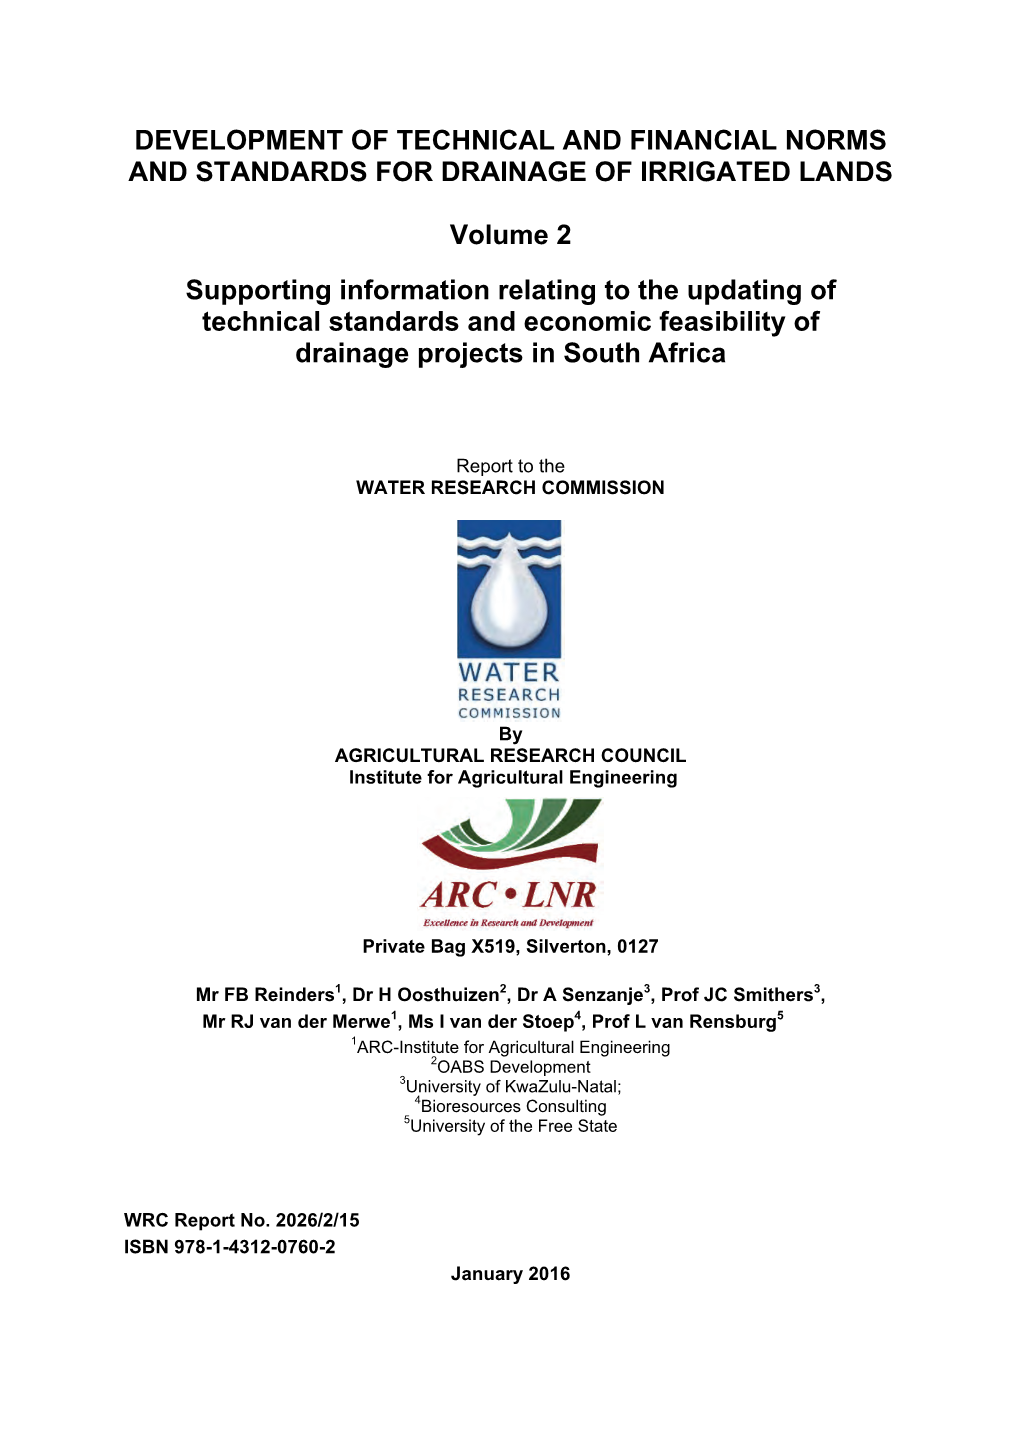 Development of Technical and Financial Norms and Standards for Drainage of Irrigated Lands